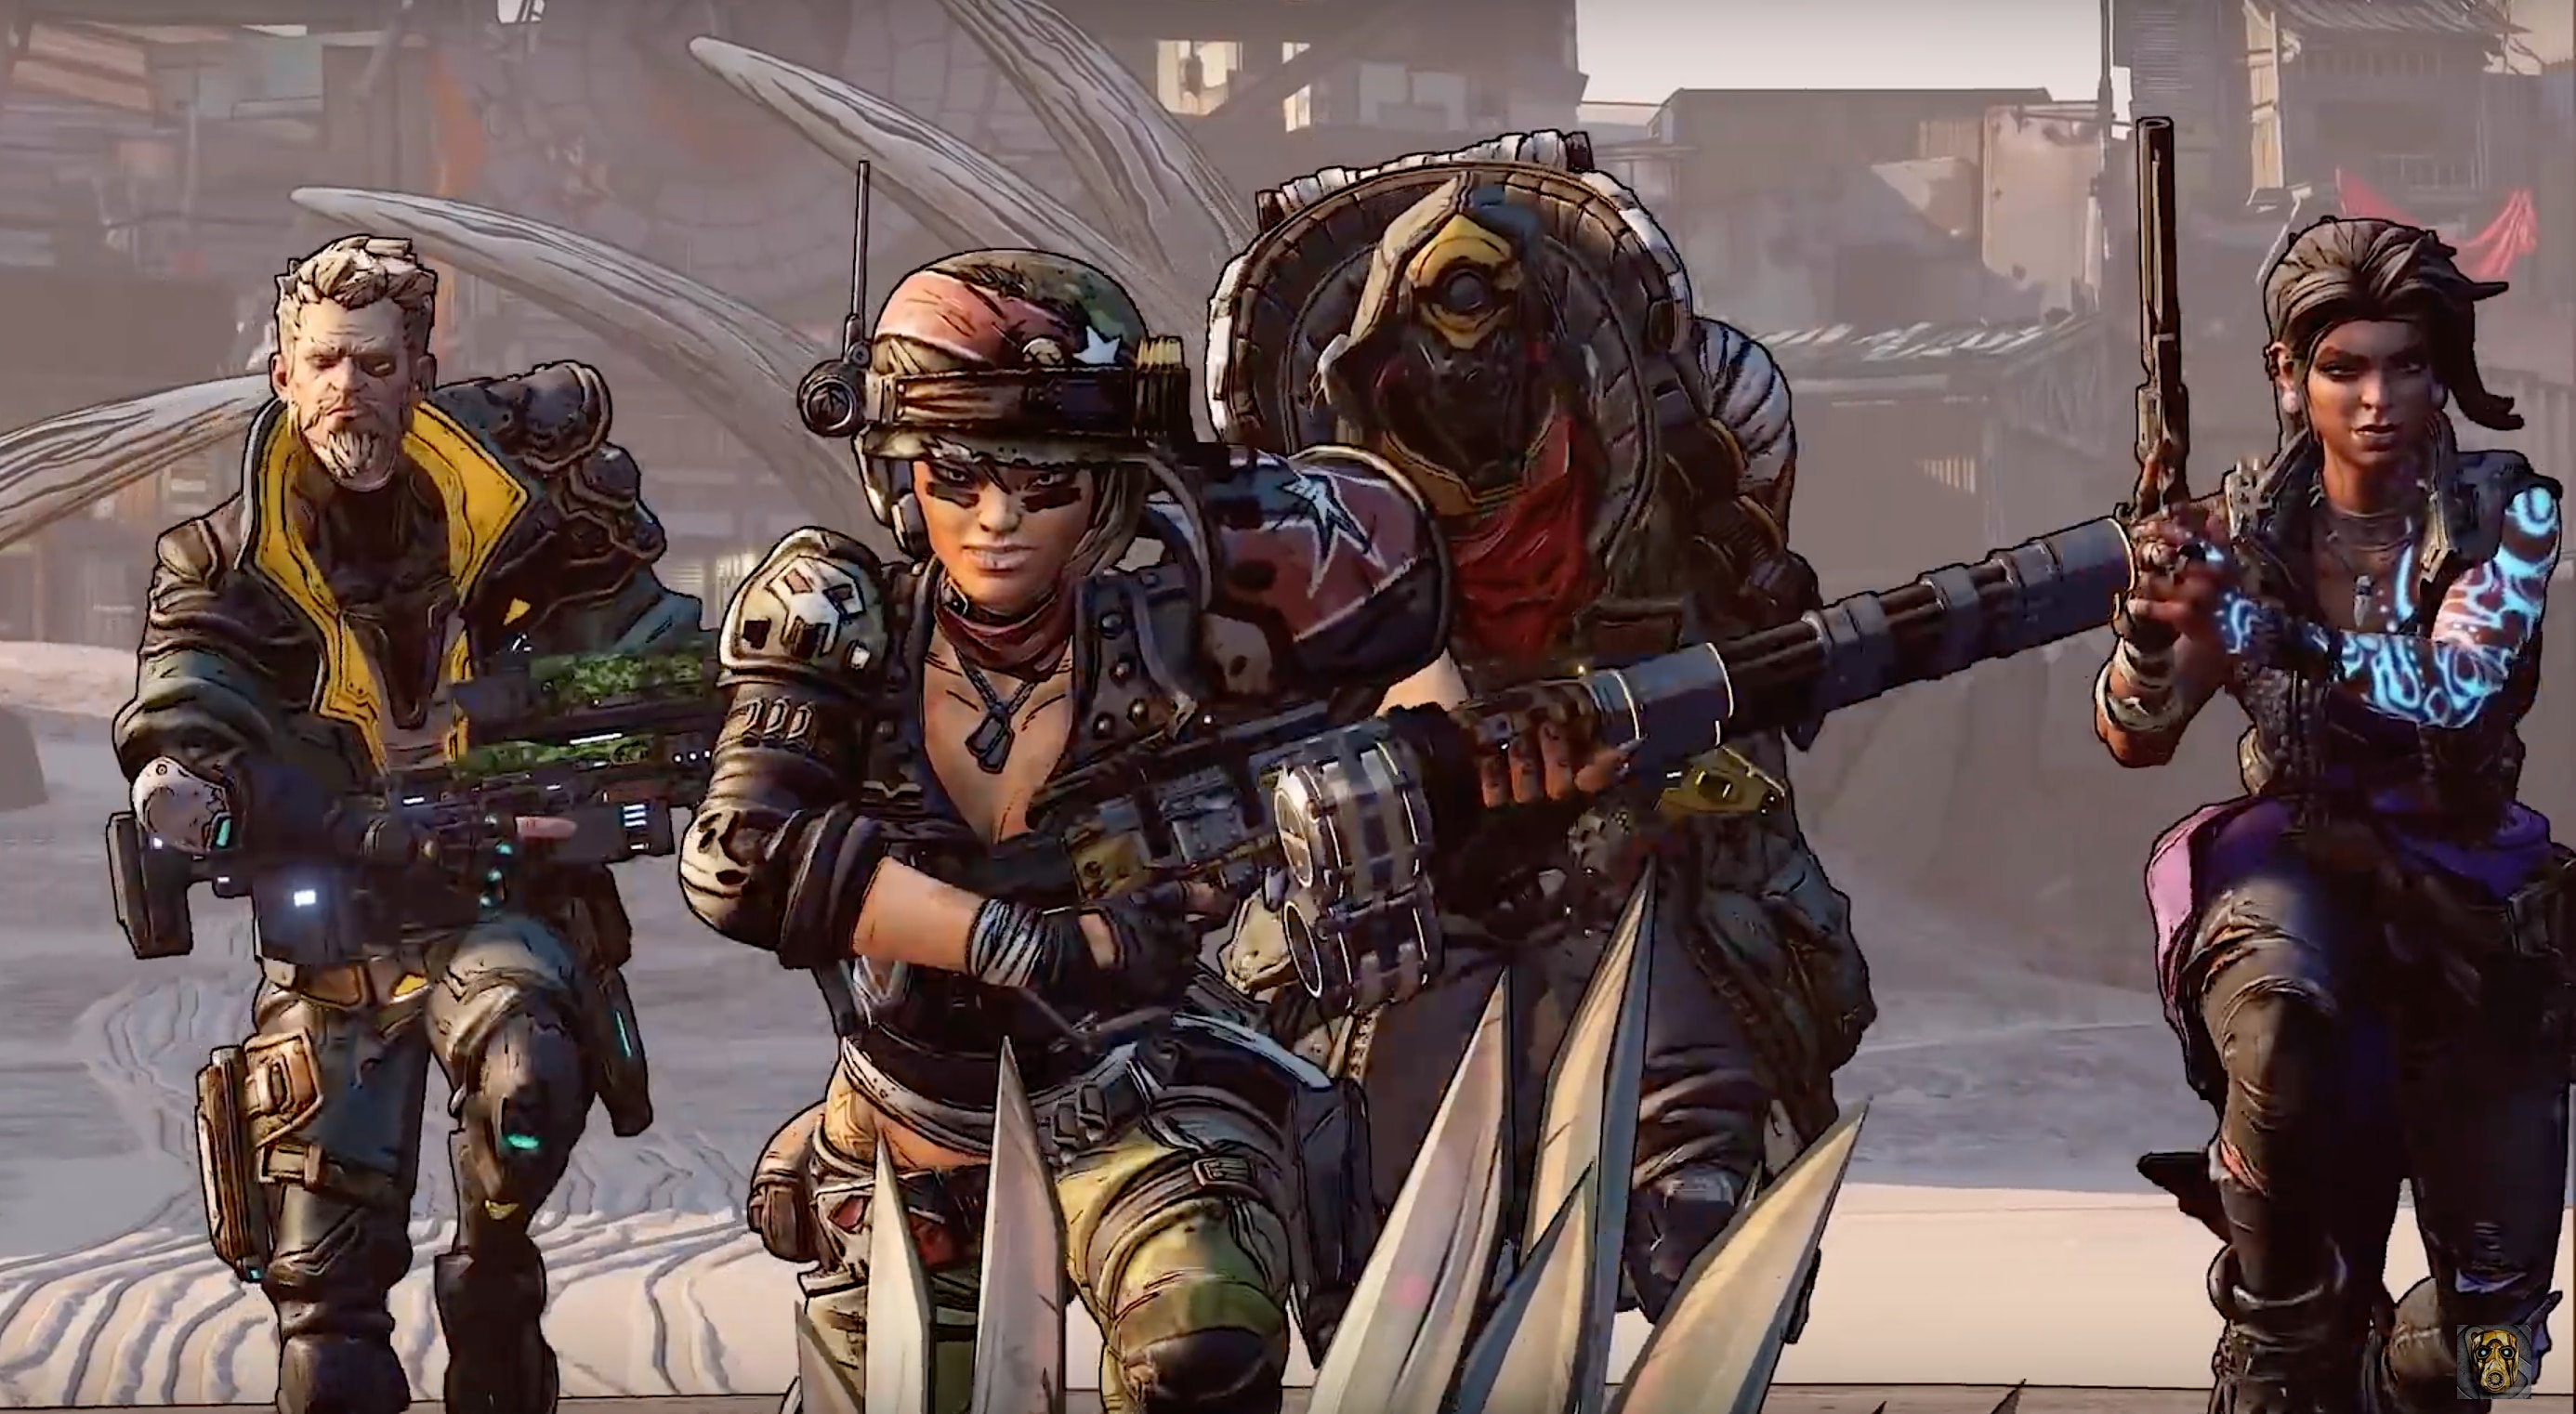 The four playable characters of Borderlands 3